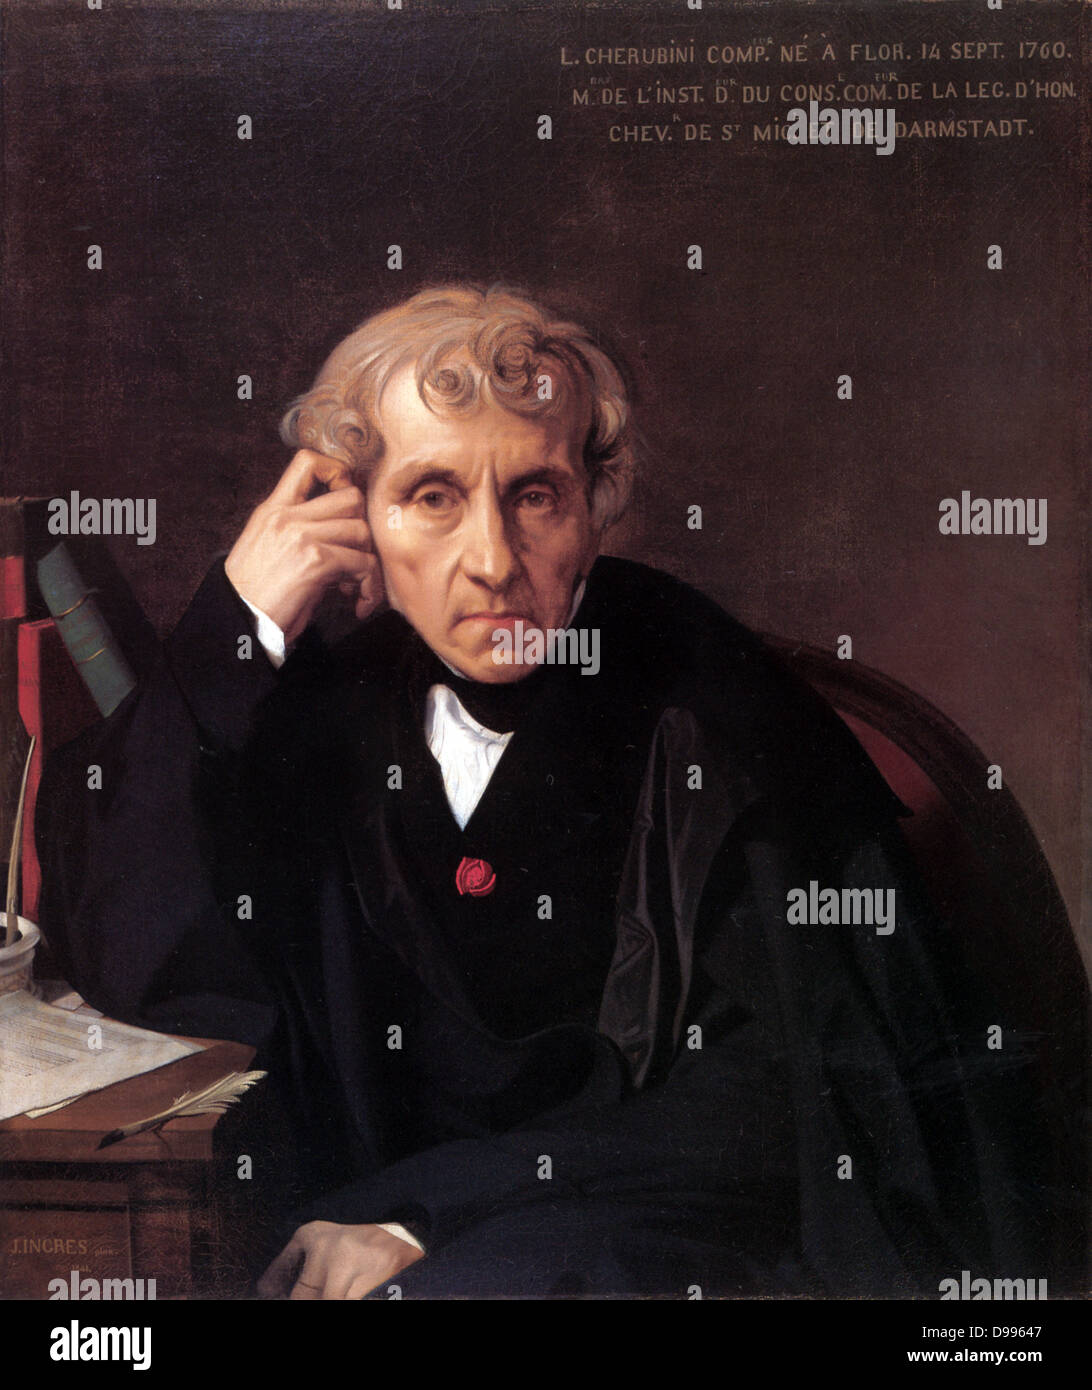 Jean Auguste Dominique Ingres (29 August 1780 – 14 January 1867) French Neoclassical painter. Stock Photo